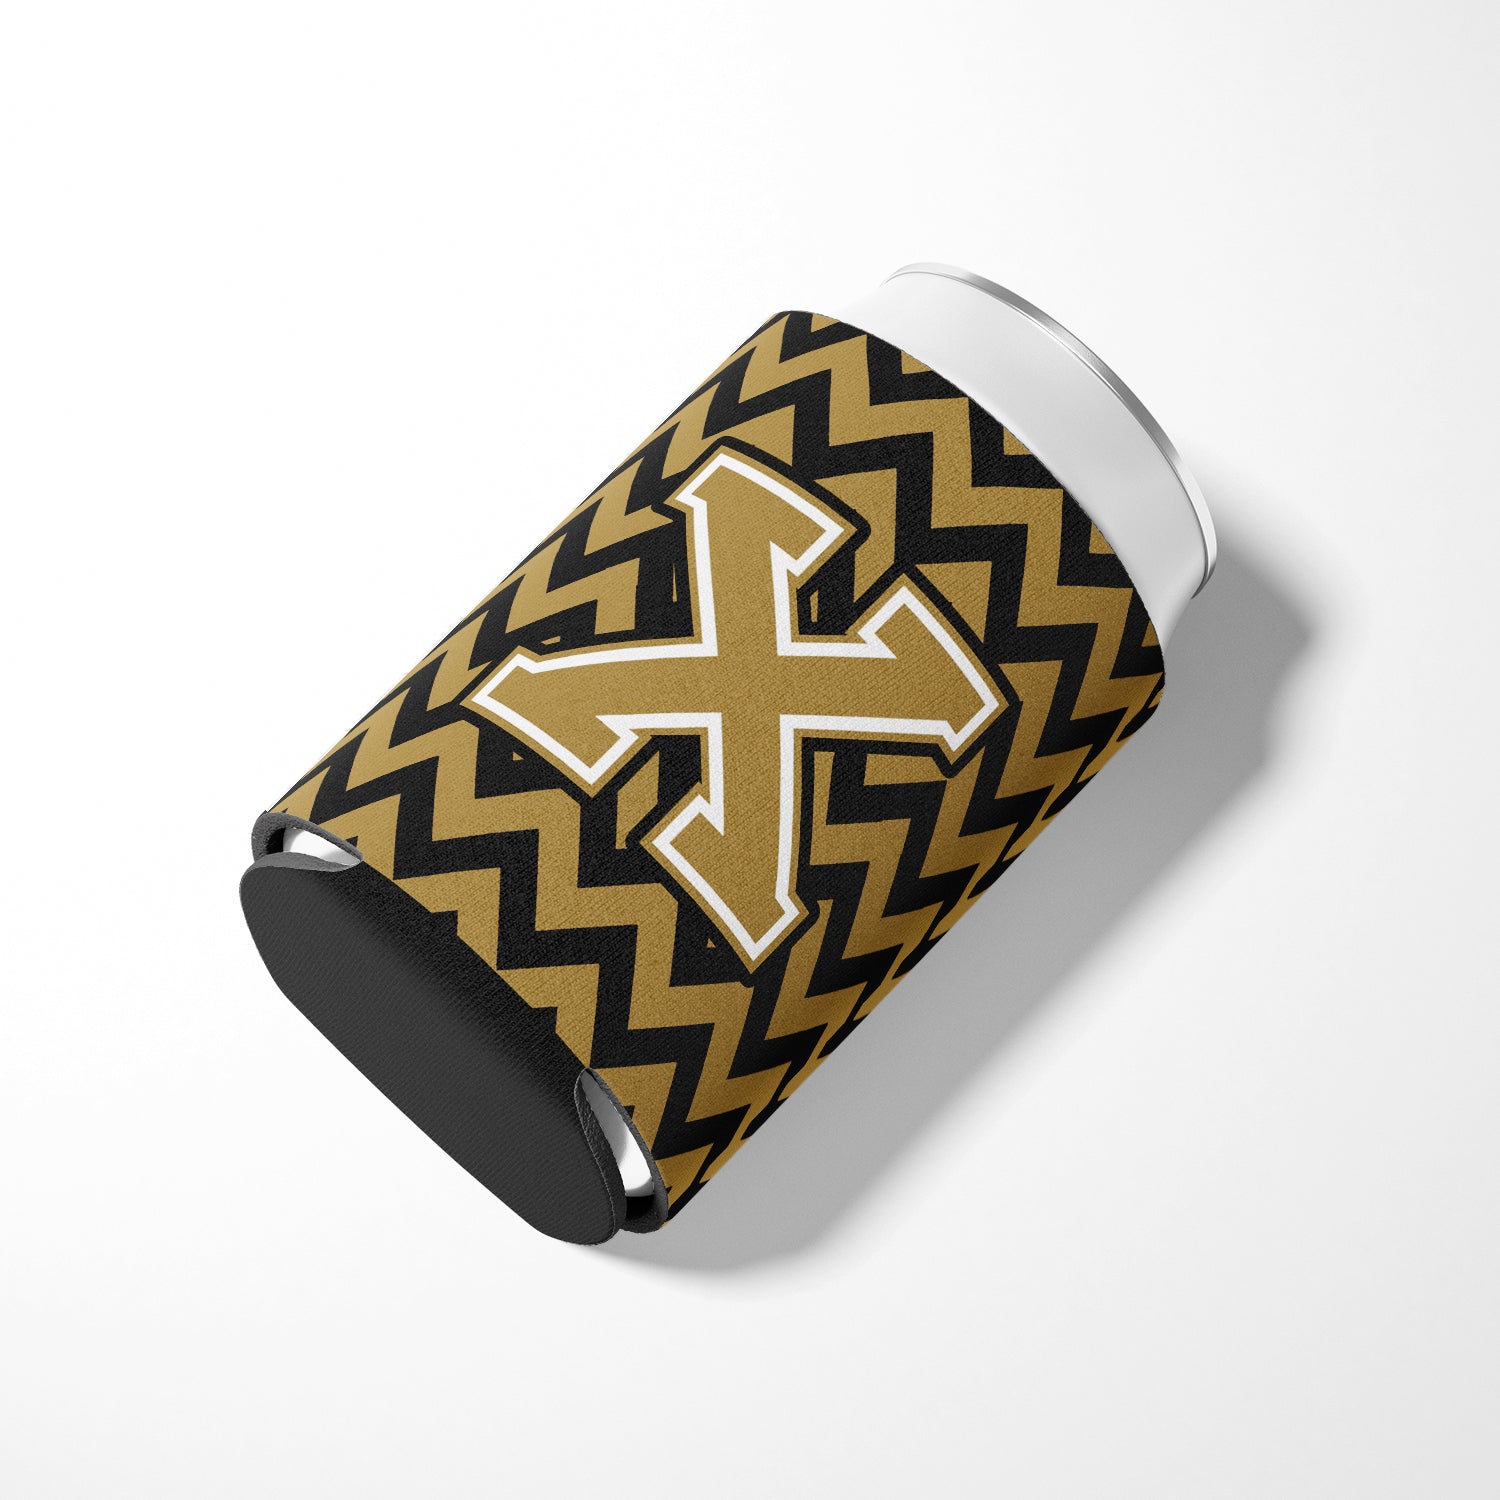 Letter X Chevron Black and Gold  Can or Bottle Hugger CJ1050-XCC.